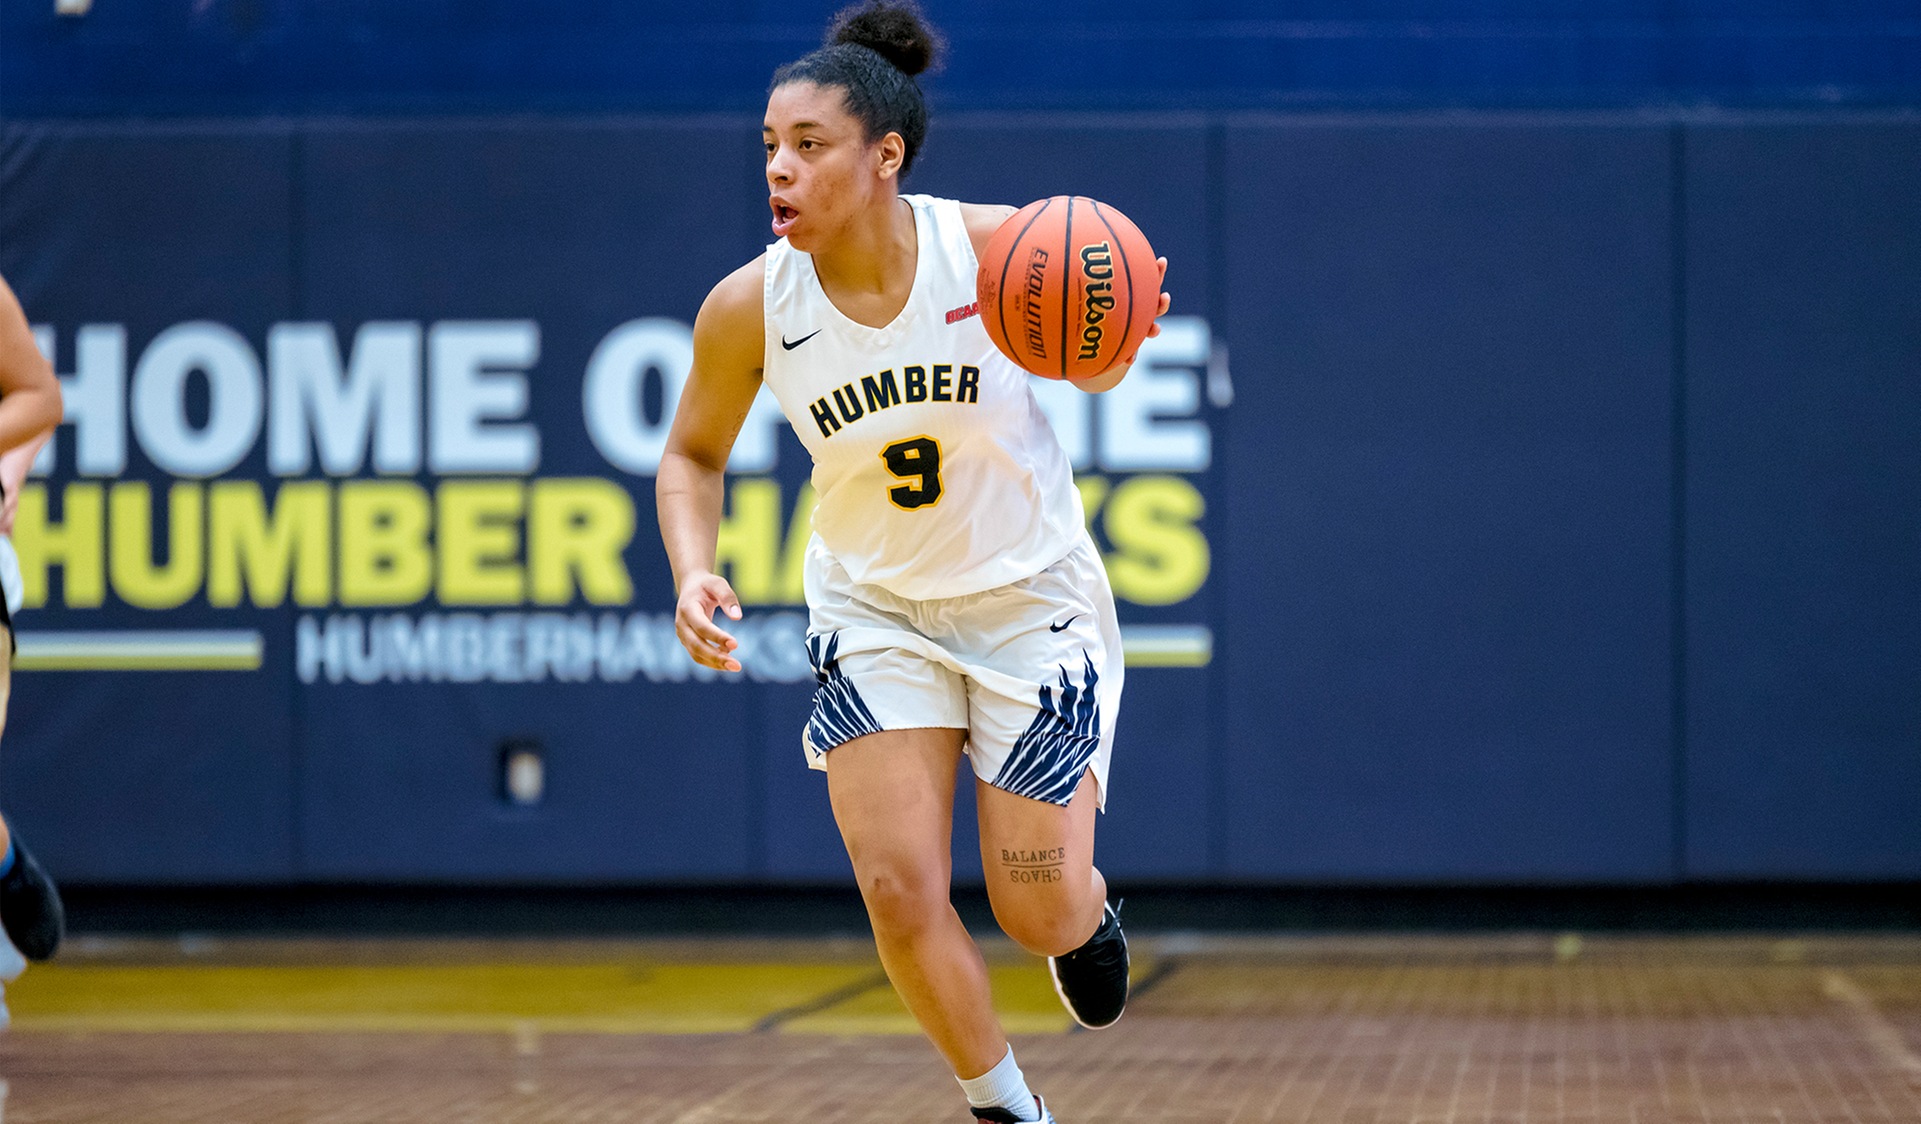 No. 11 WOMEN'S BASKETBALL PULLS AWAY FROM SAULT LATE, 63-49